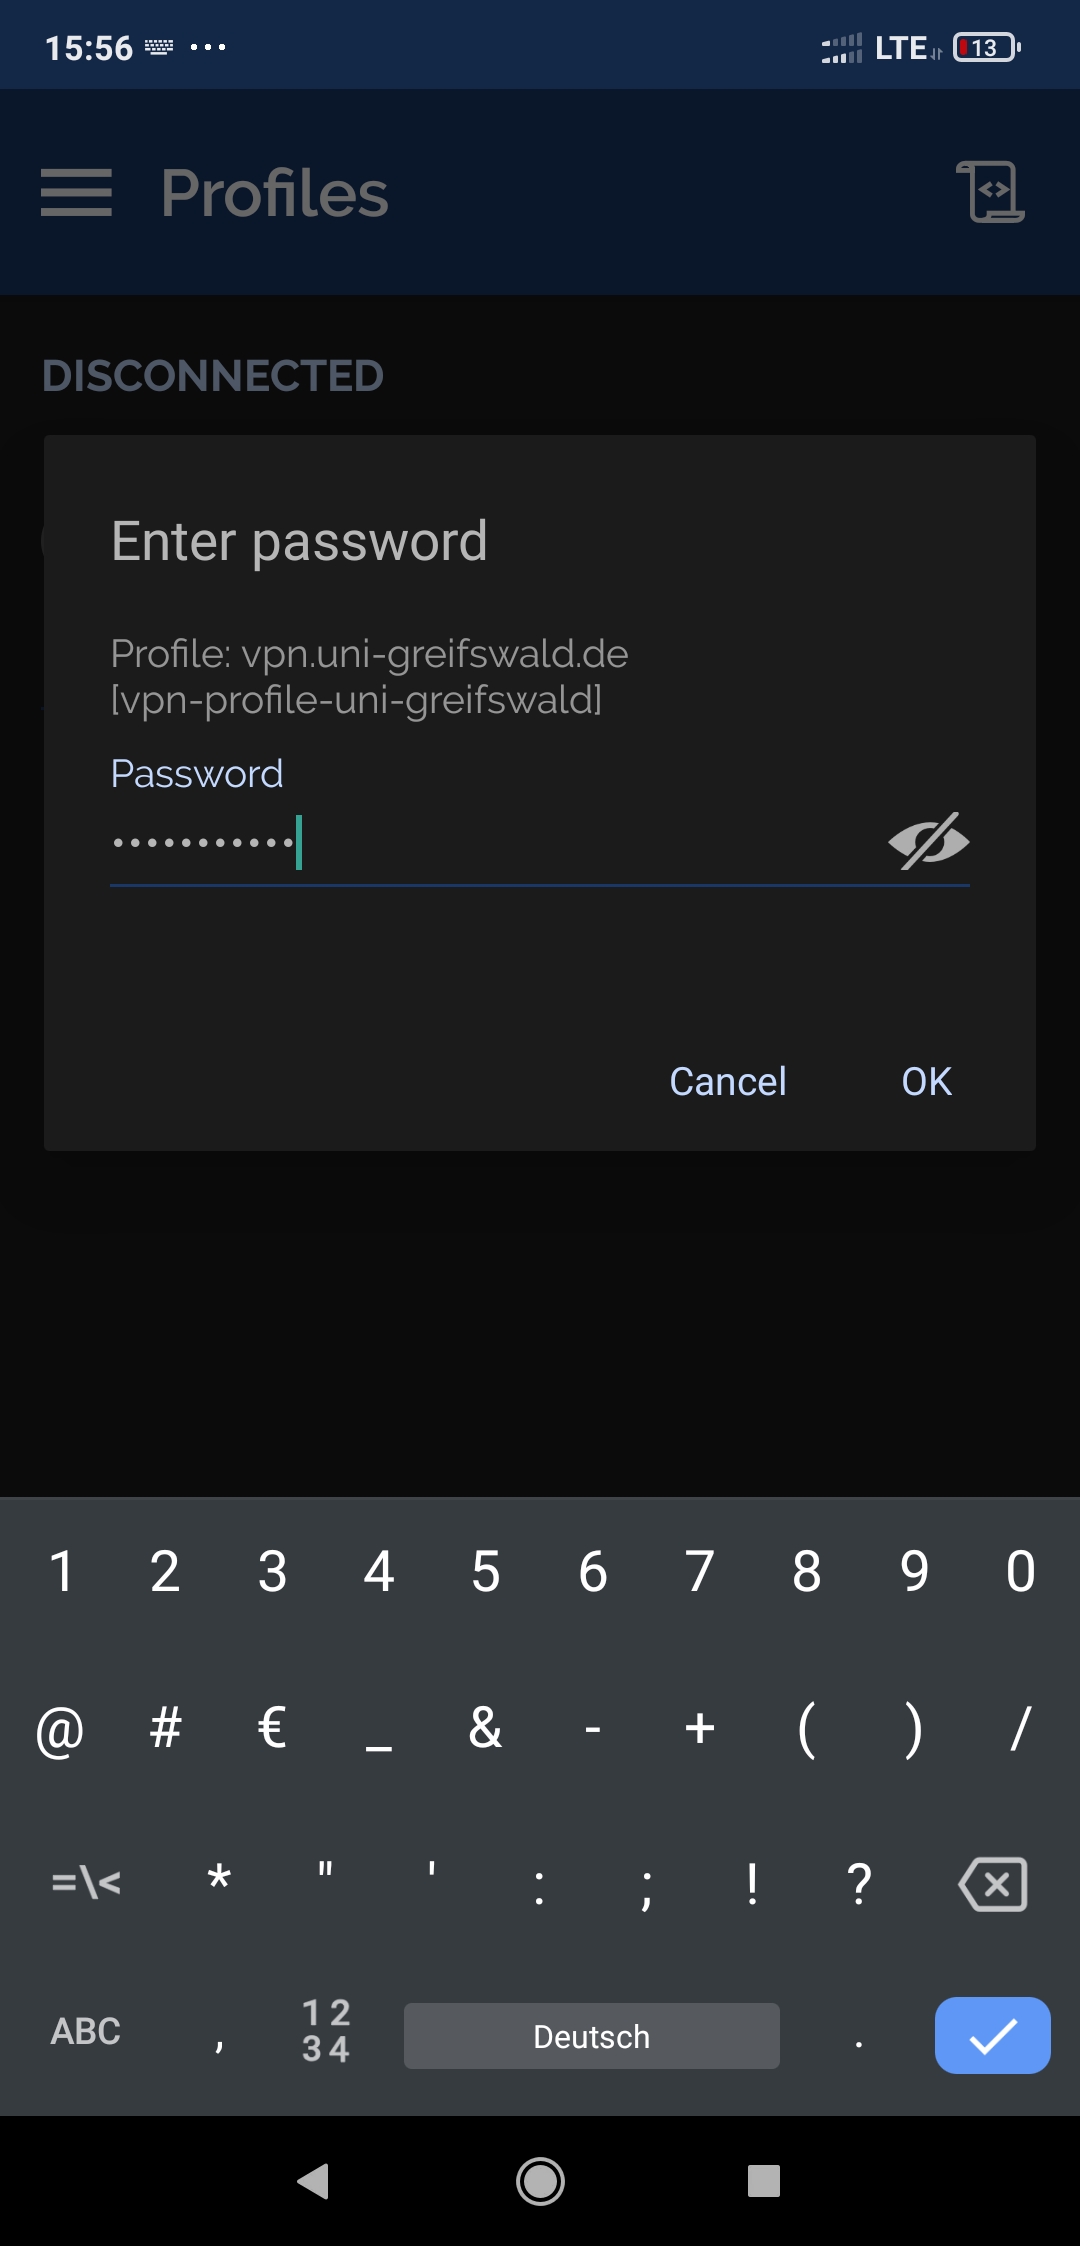 Enter your central password